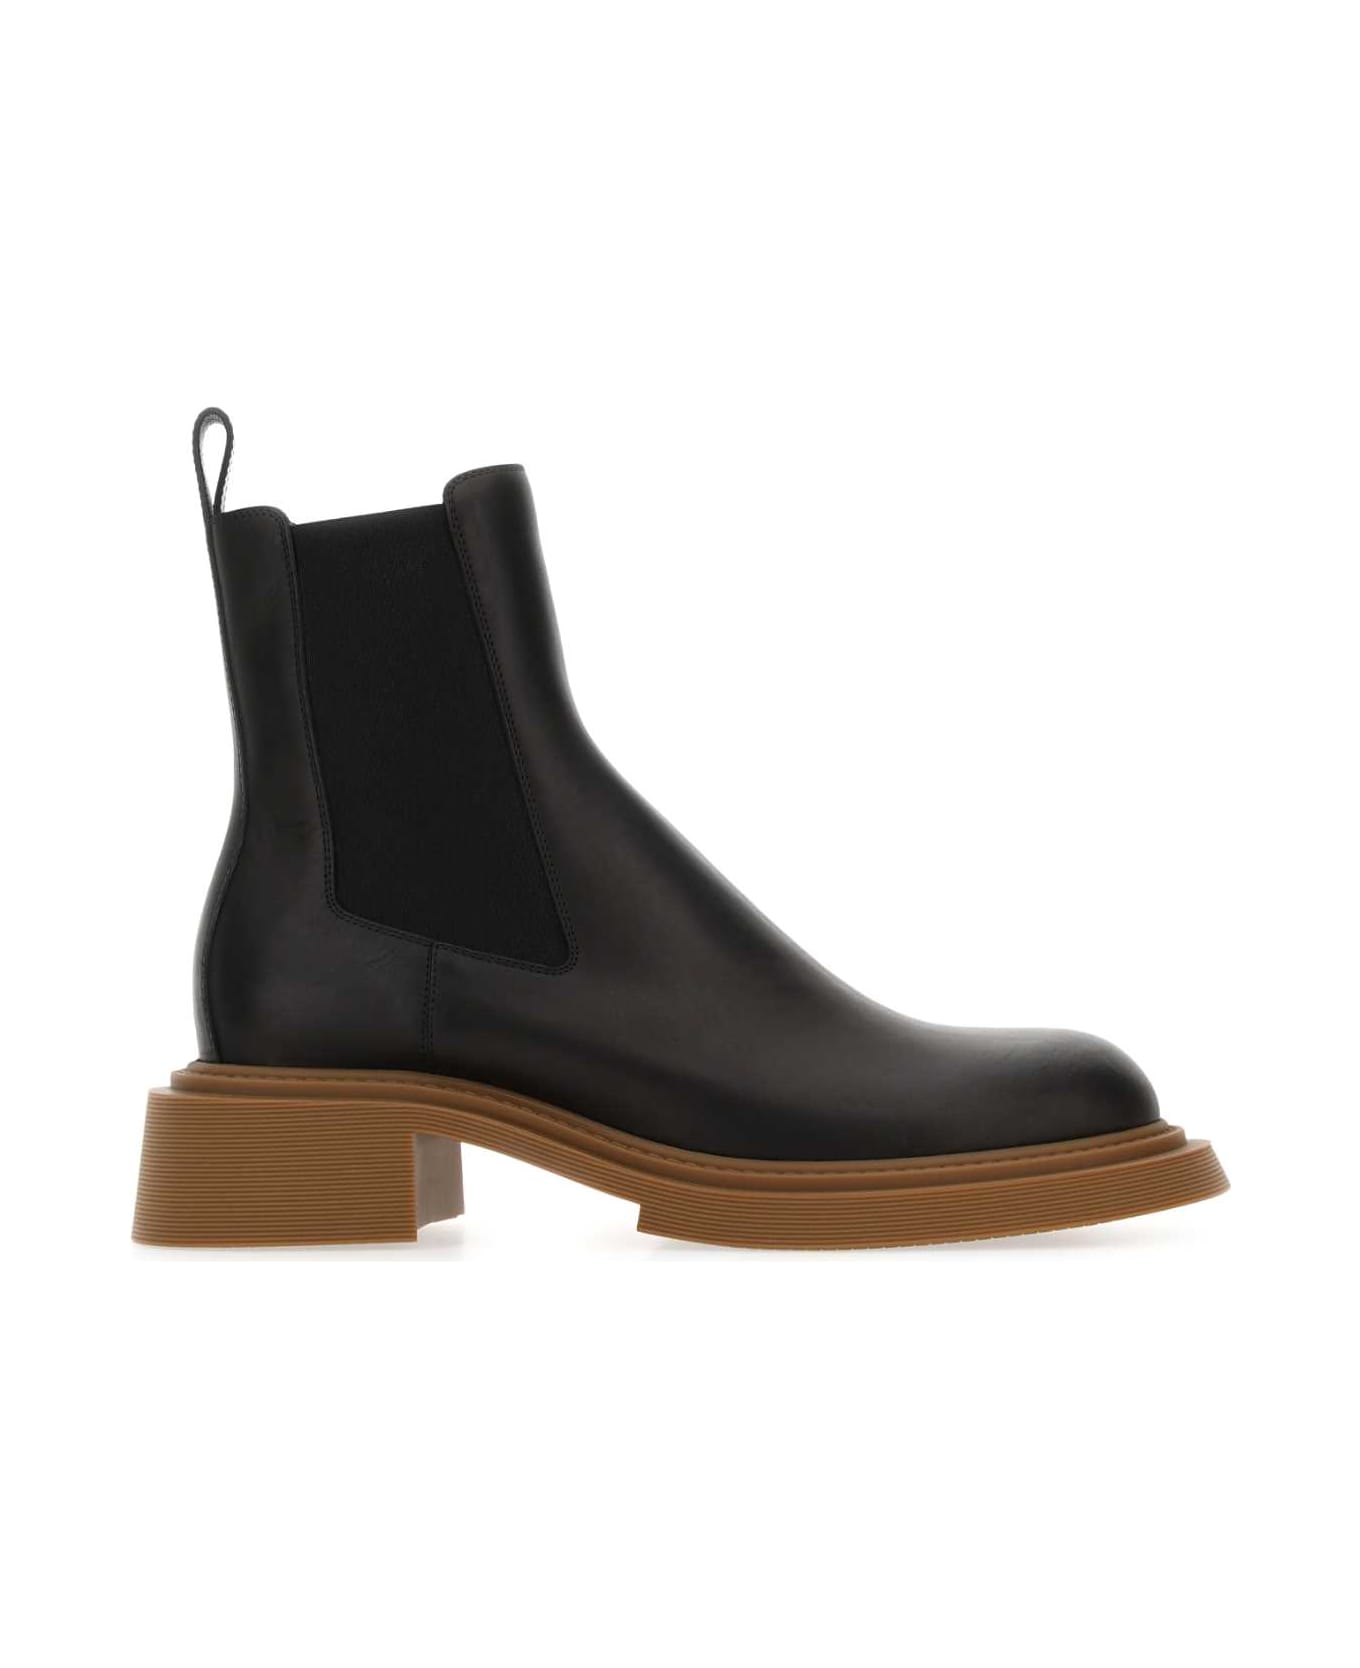 Loewe Black Leather Chelsea Ankle Boots - BLACK ブーツ